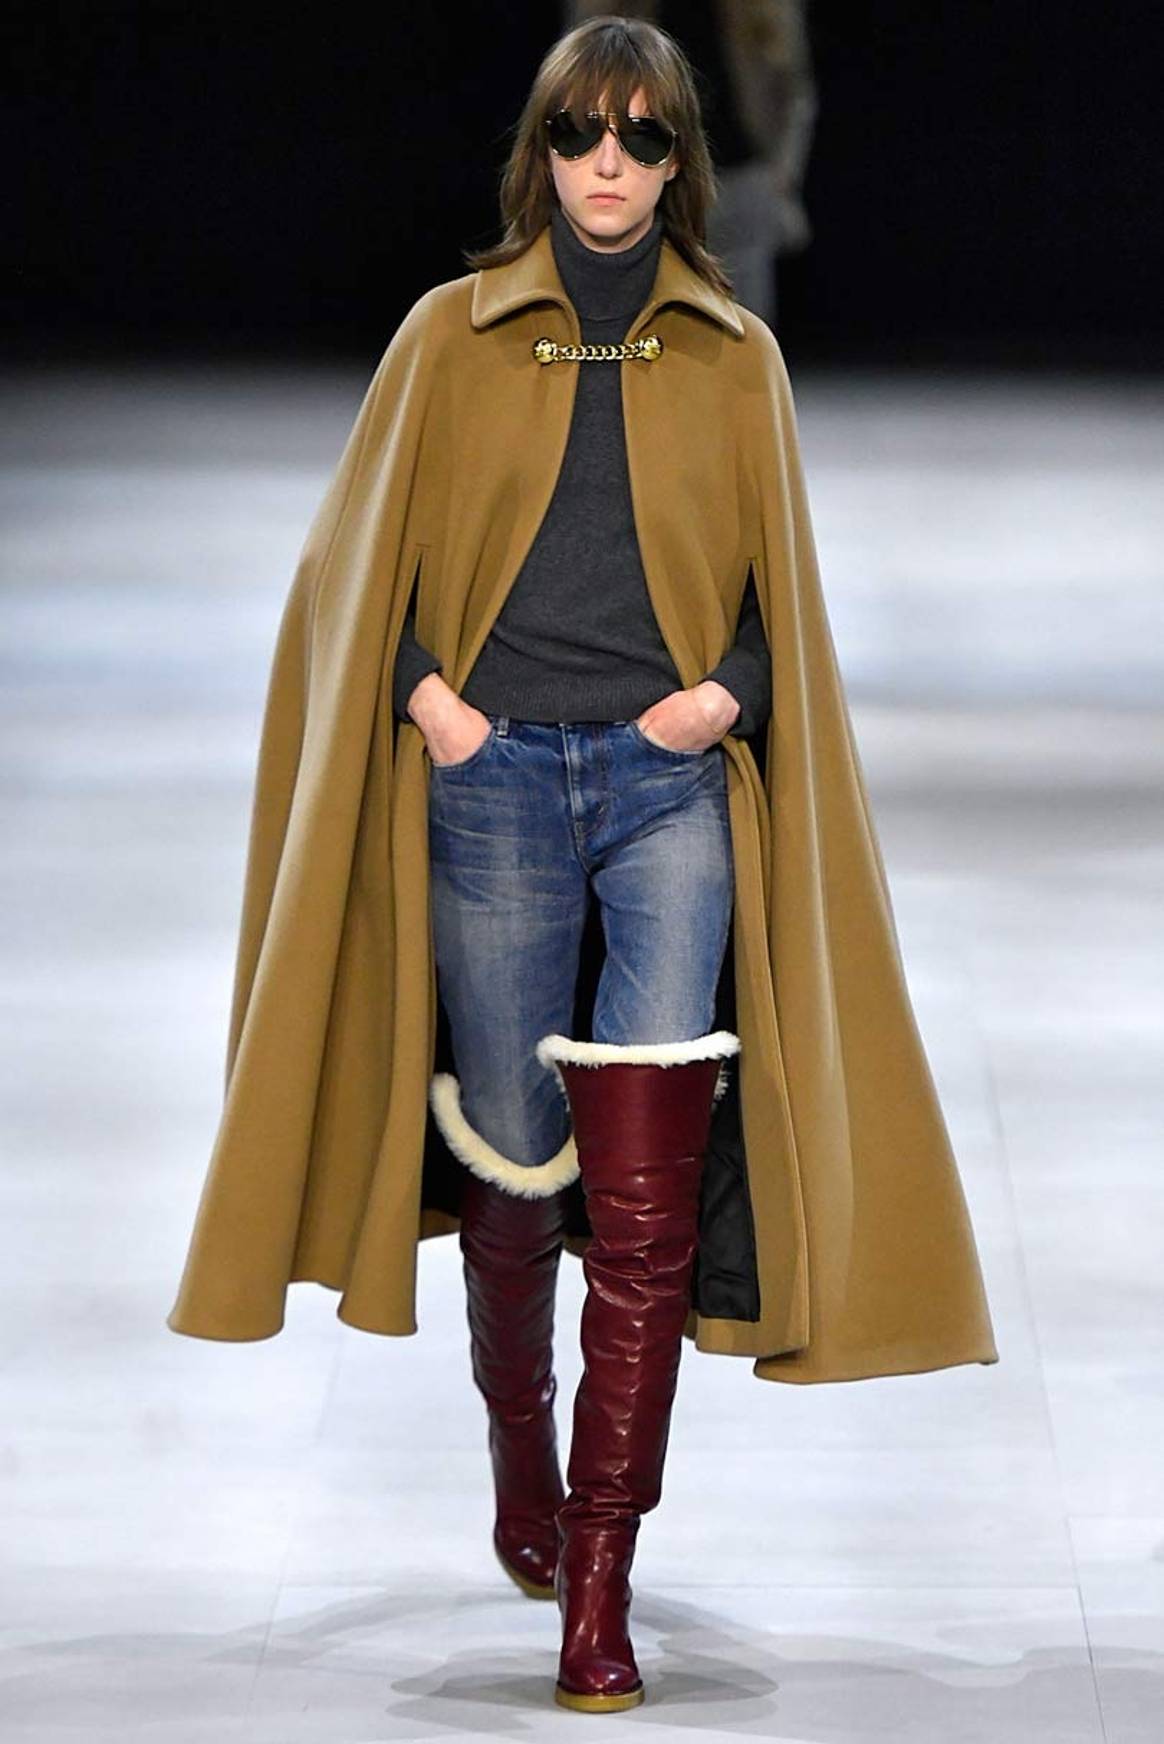 Hedi Slimane shakes up Paris Fashion Week with a new look Celine